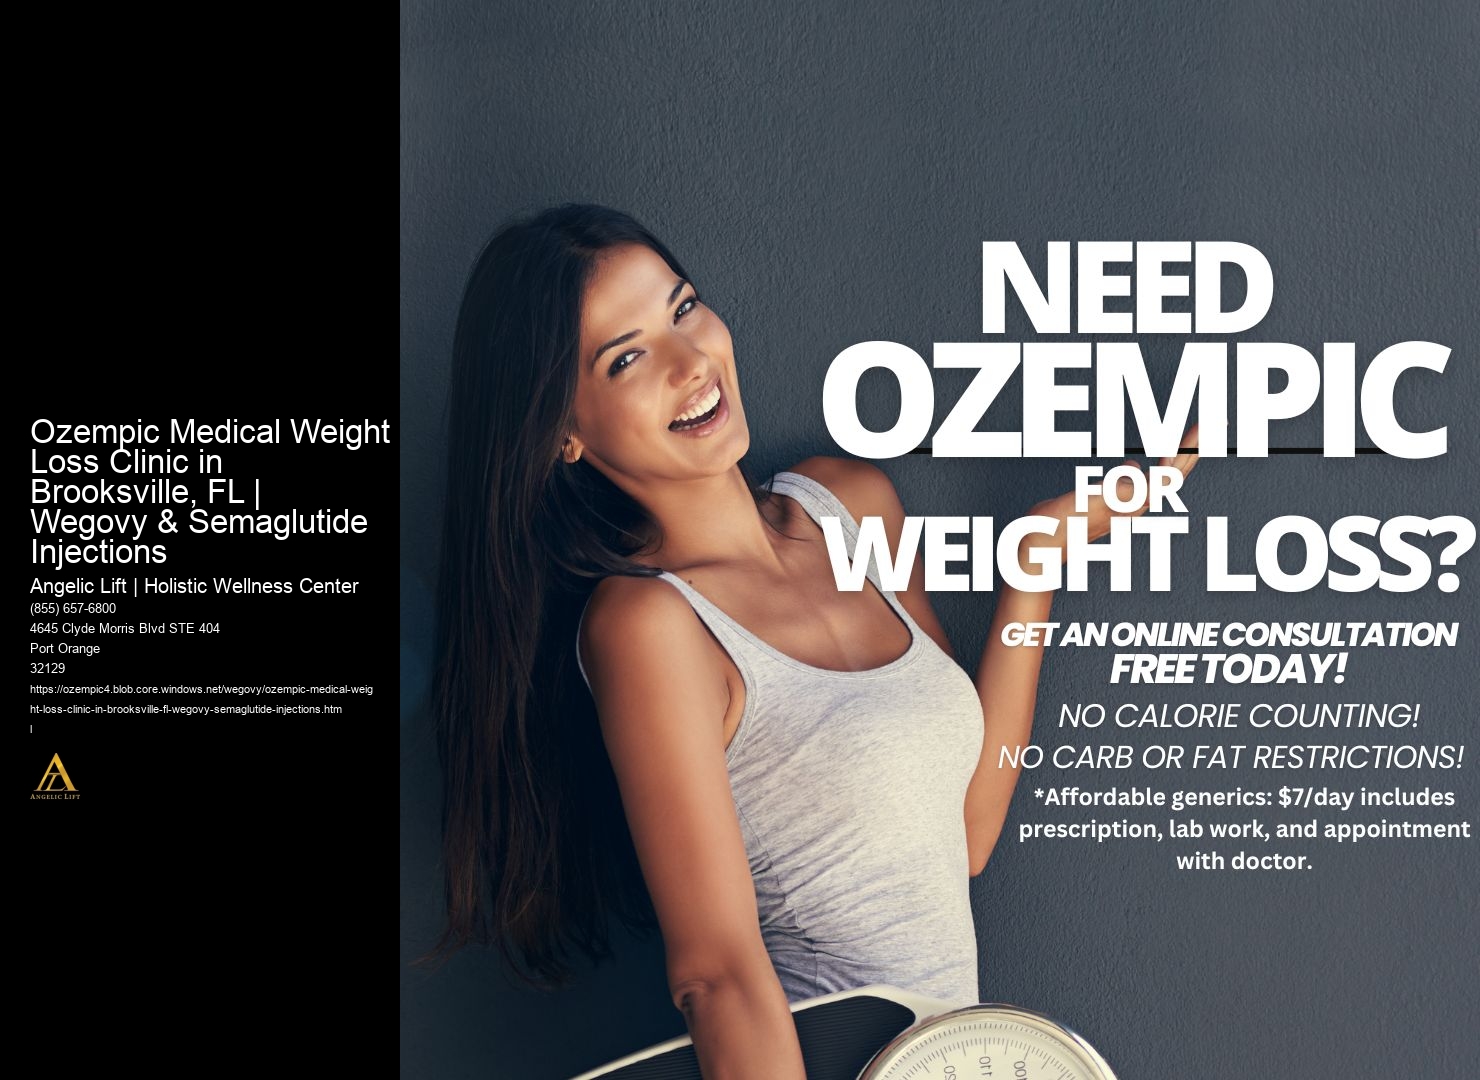 Ozempic Medical Weight Loss Clinic in Brooksville, FL | Wegovy & Semaglutide Injections